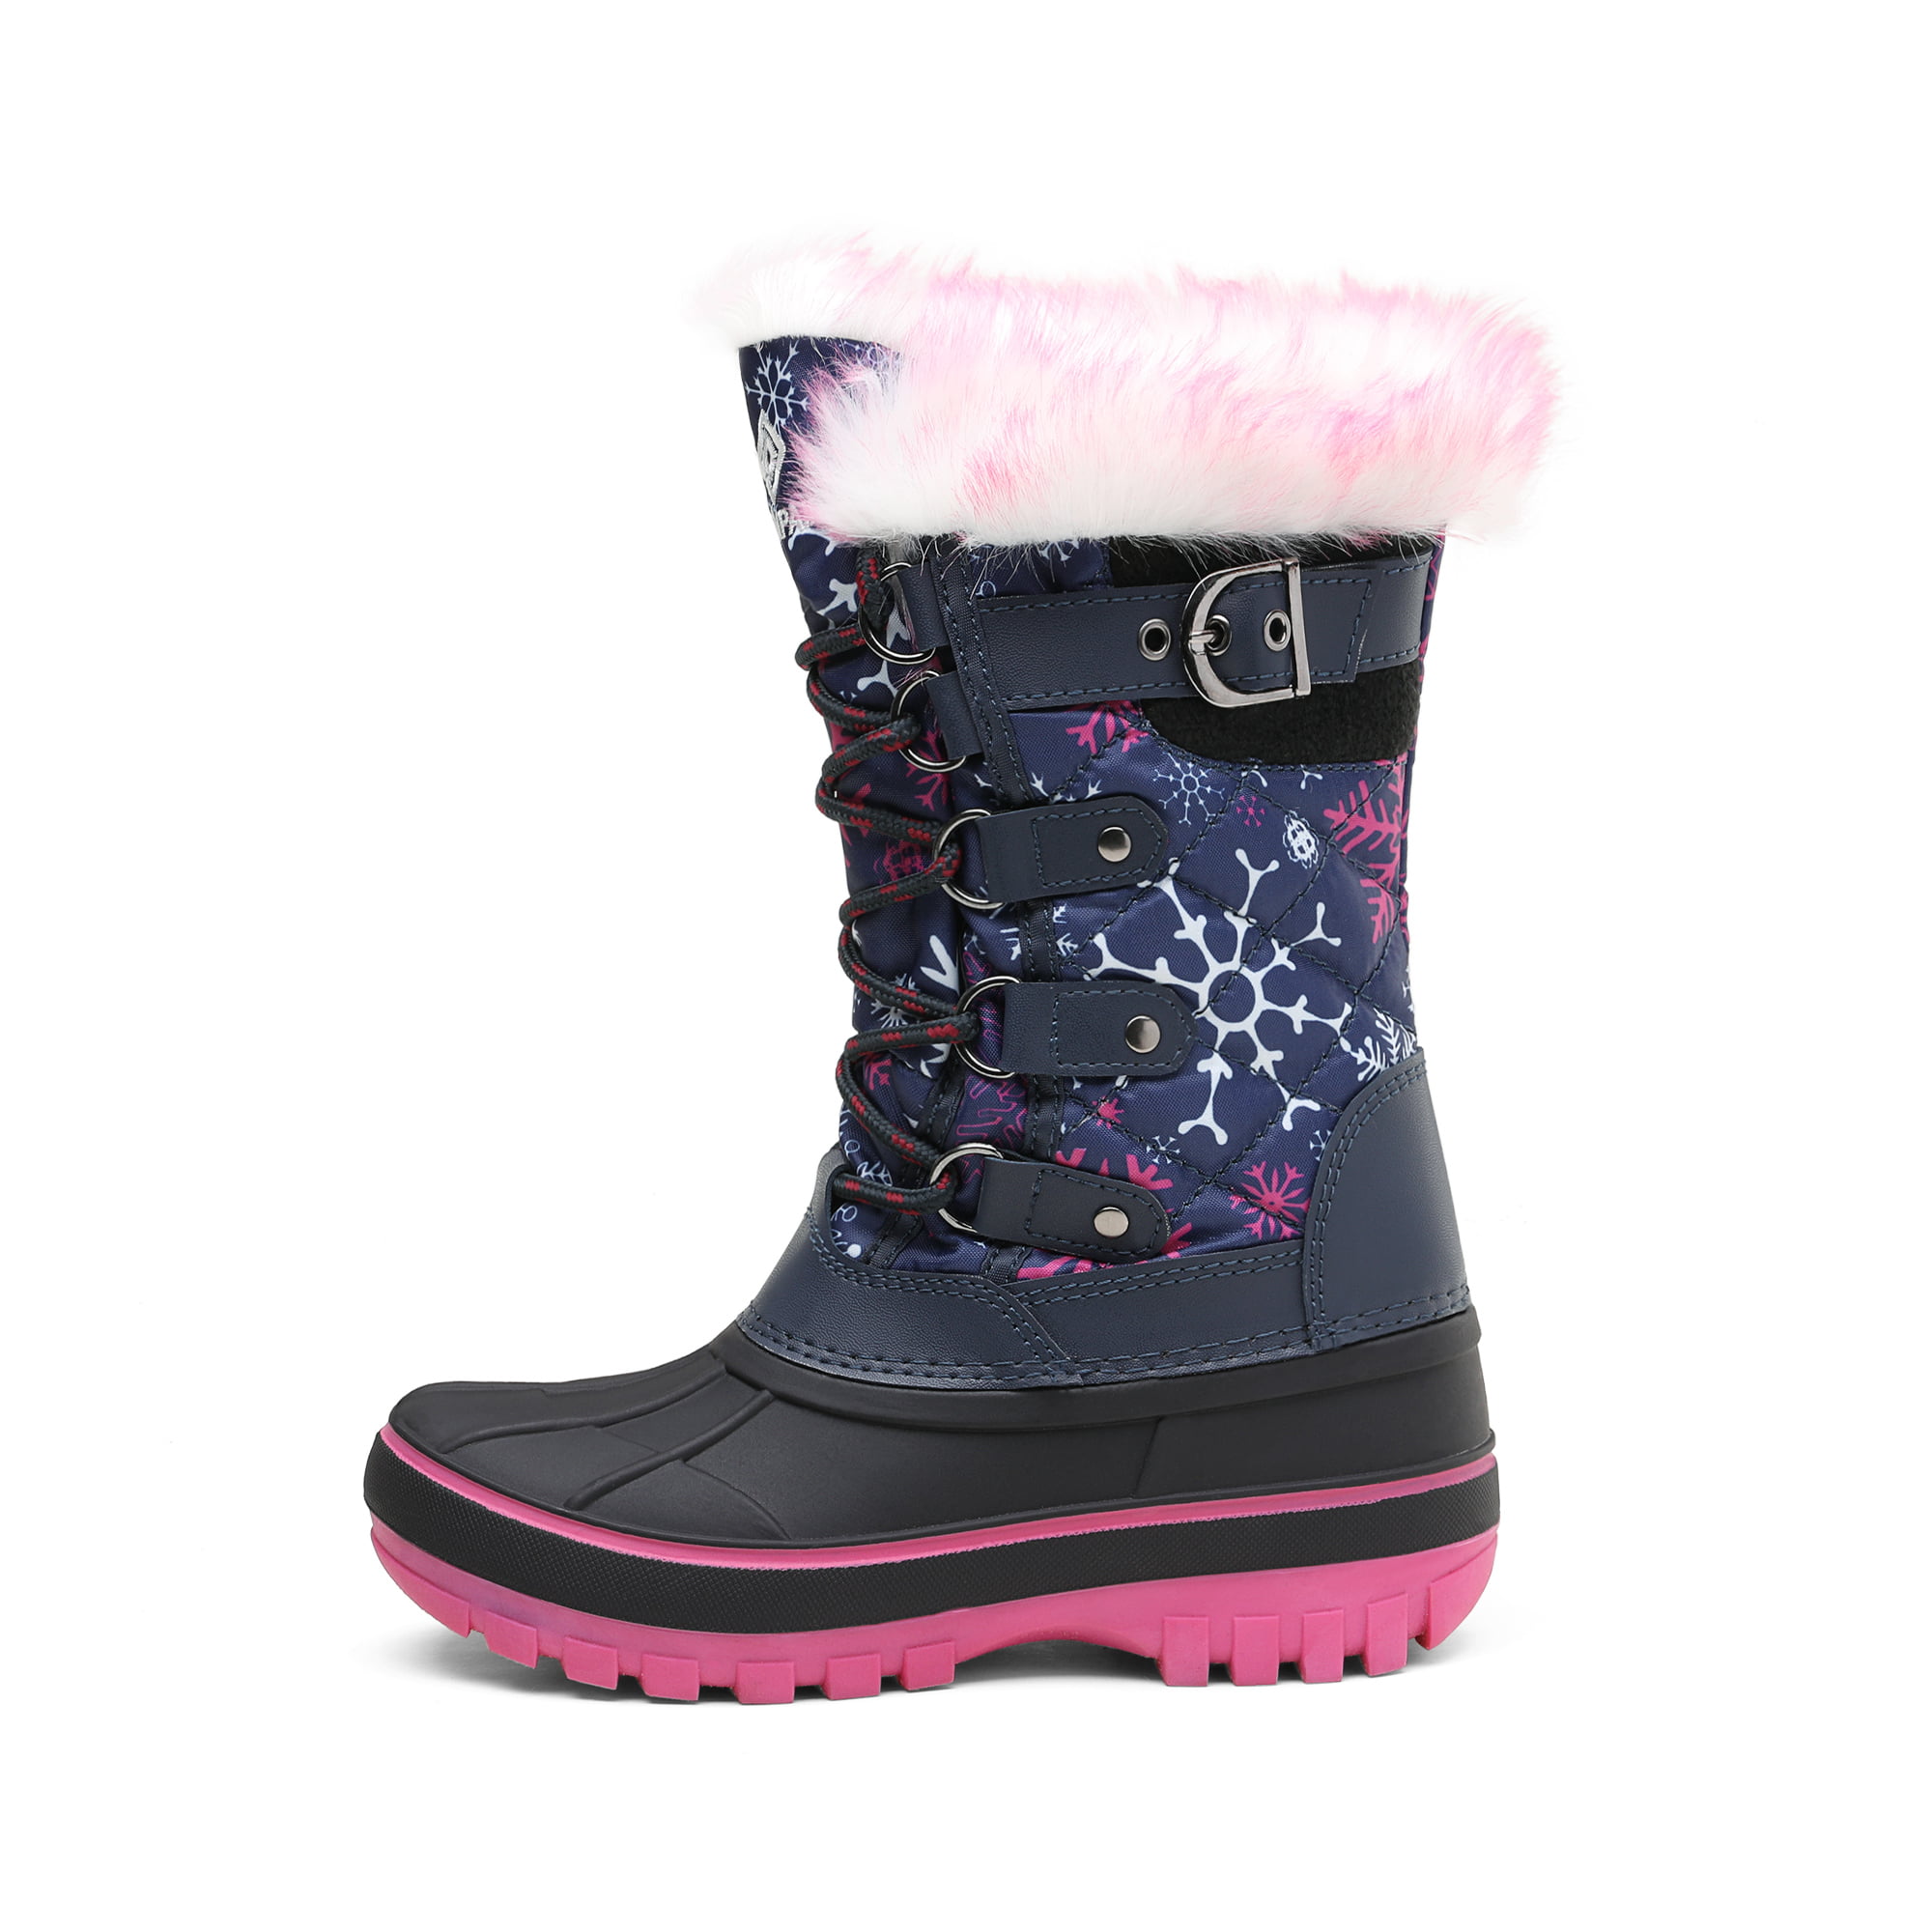 Details about   DREAM PAIRS Women's Warm Faux Fur Lined Mid-Calf Winter Snow Boots